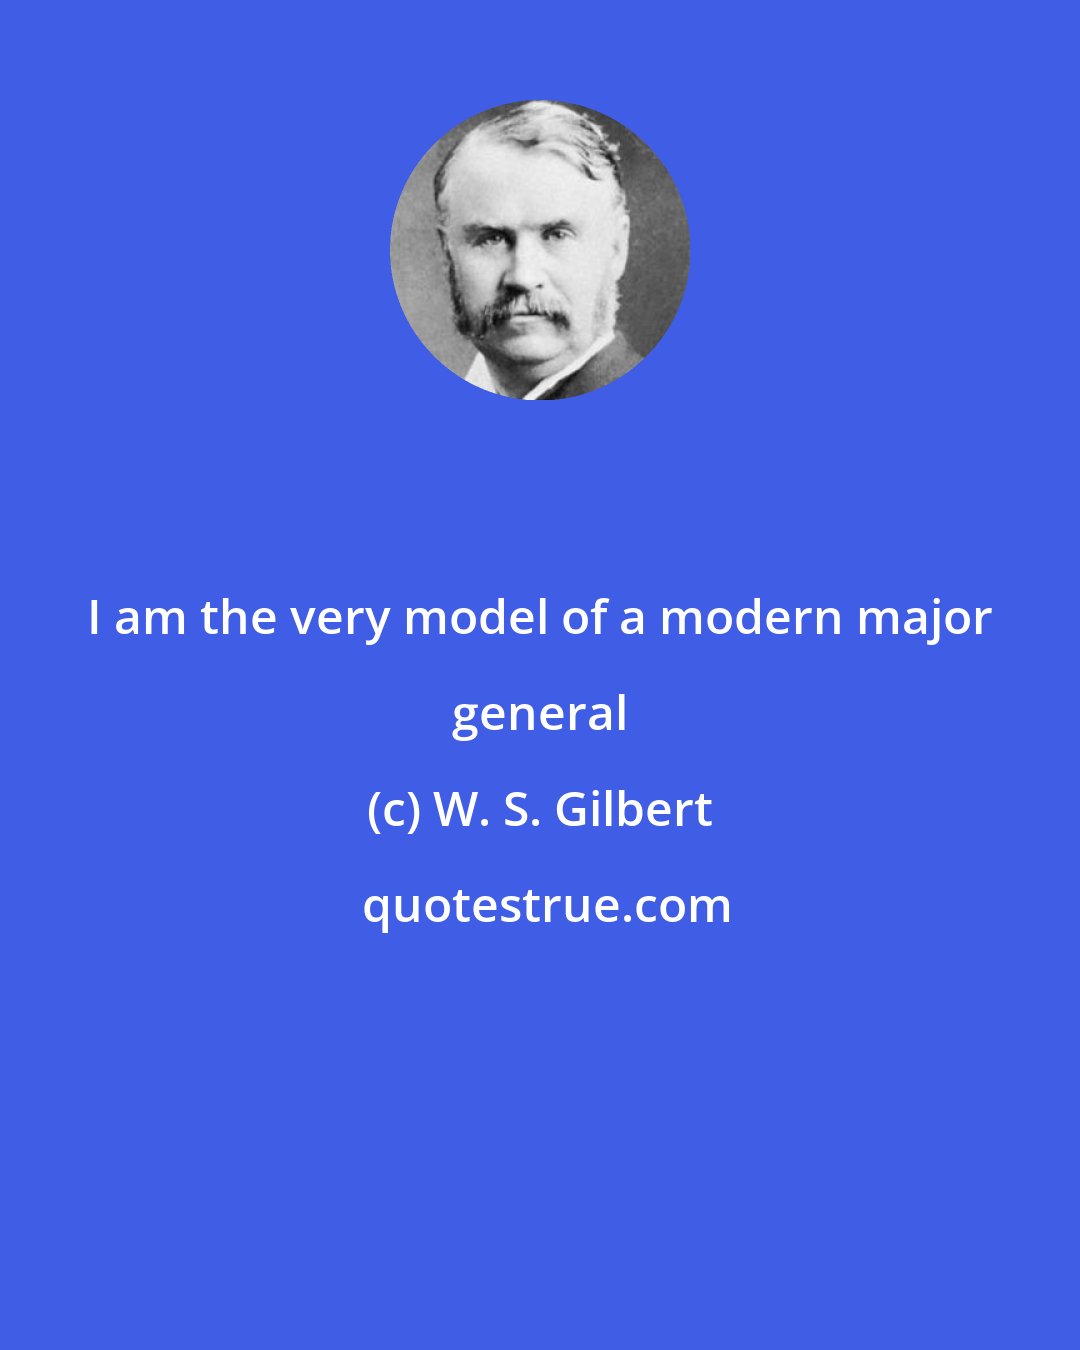 W. S. Gilbert: I am the very model of a modern major general